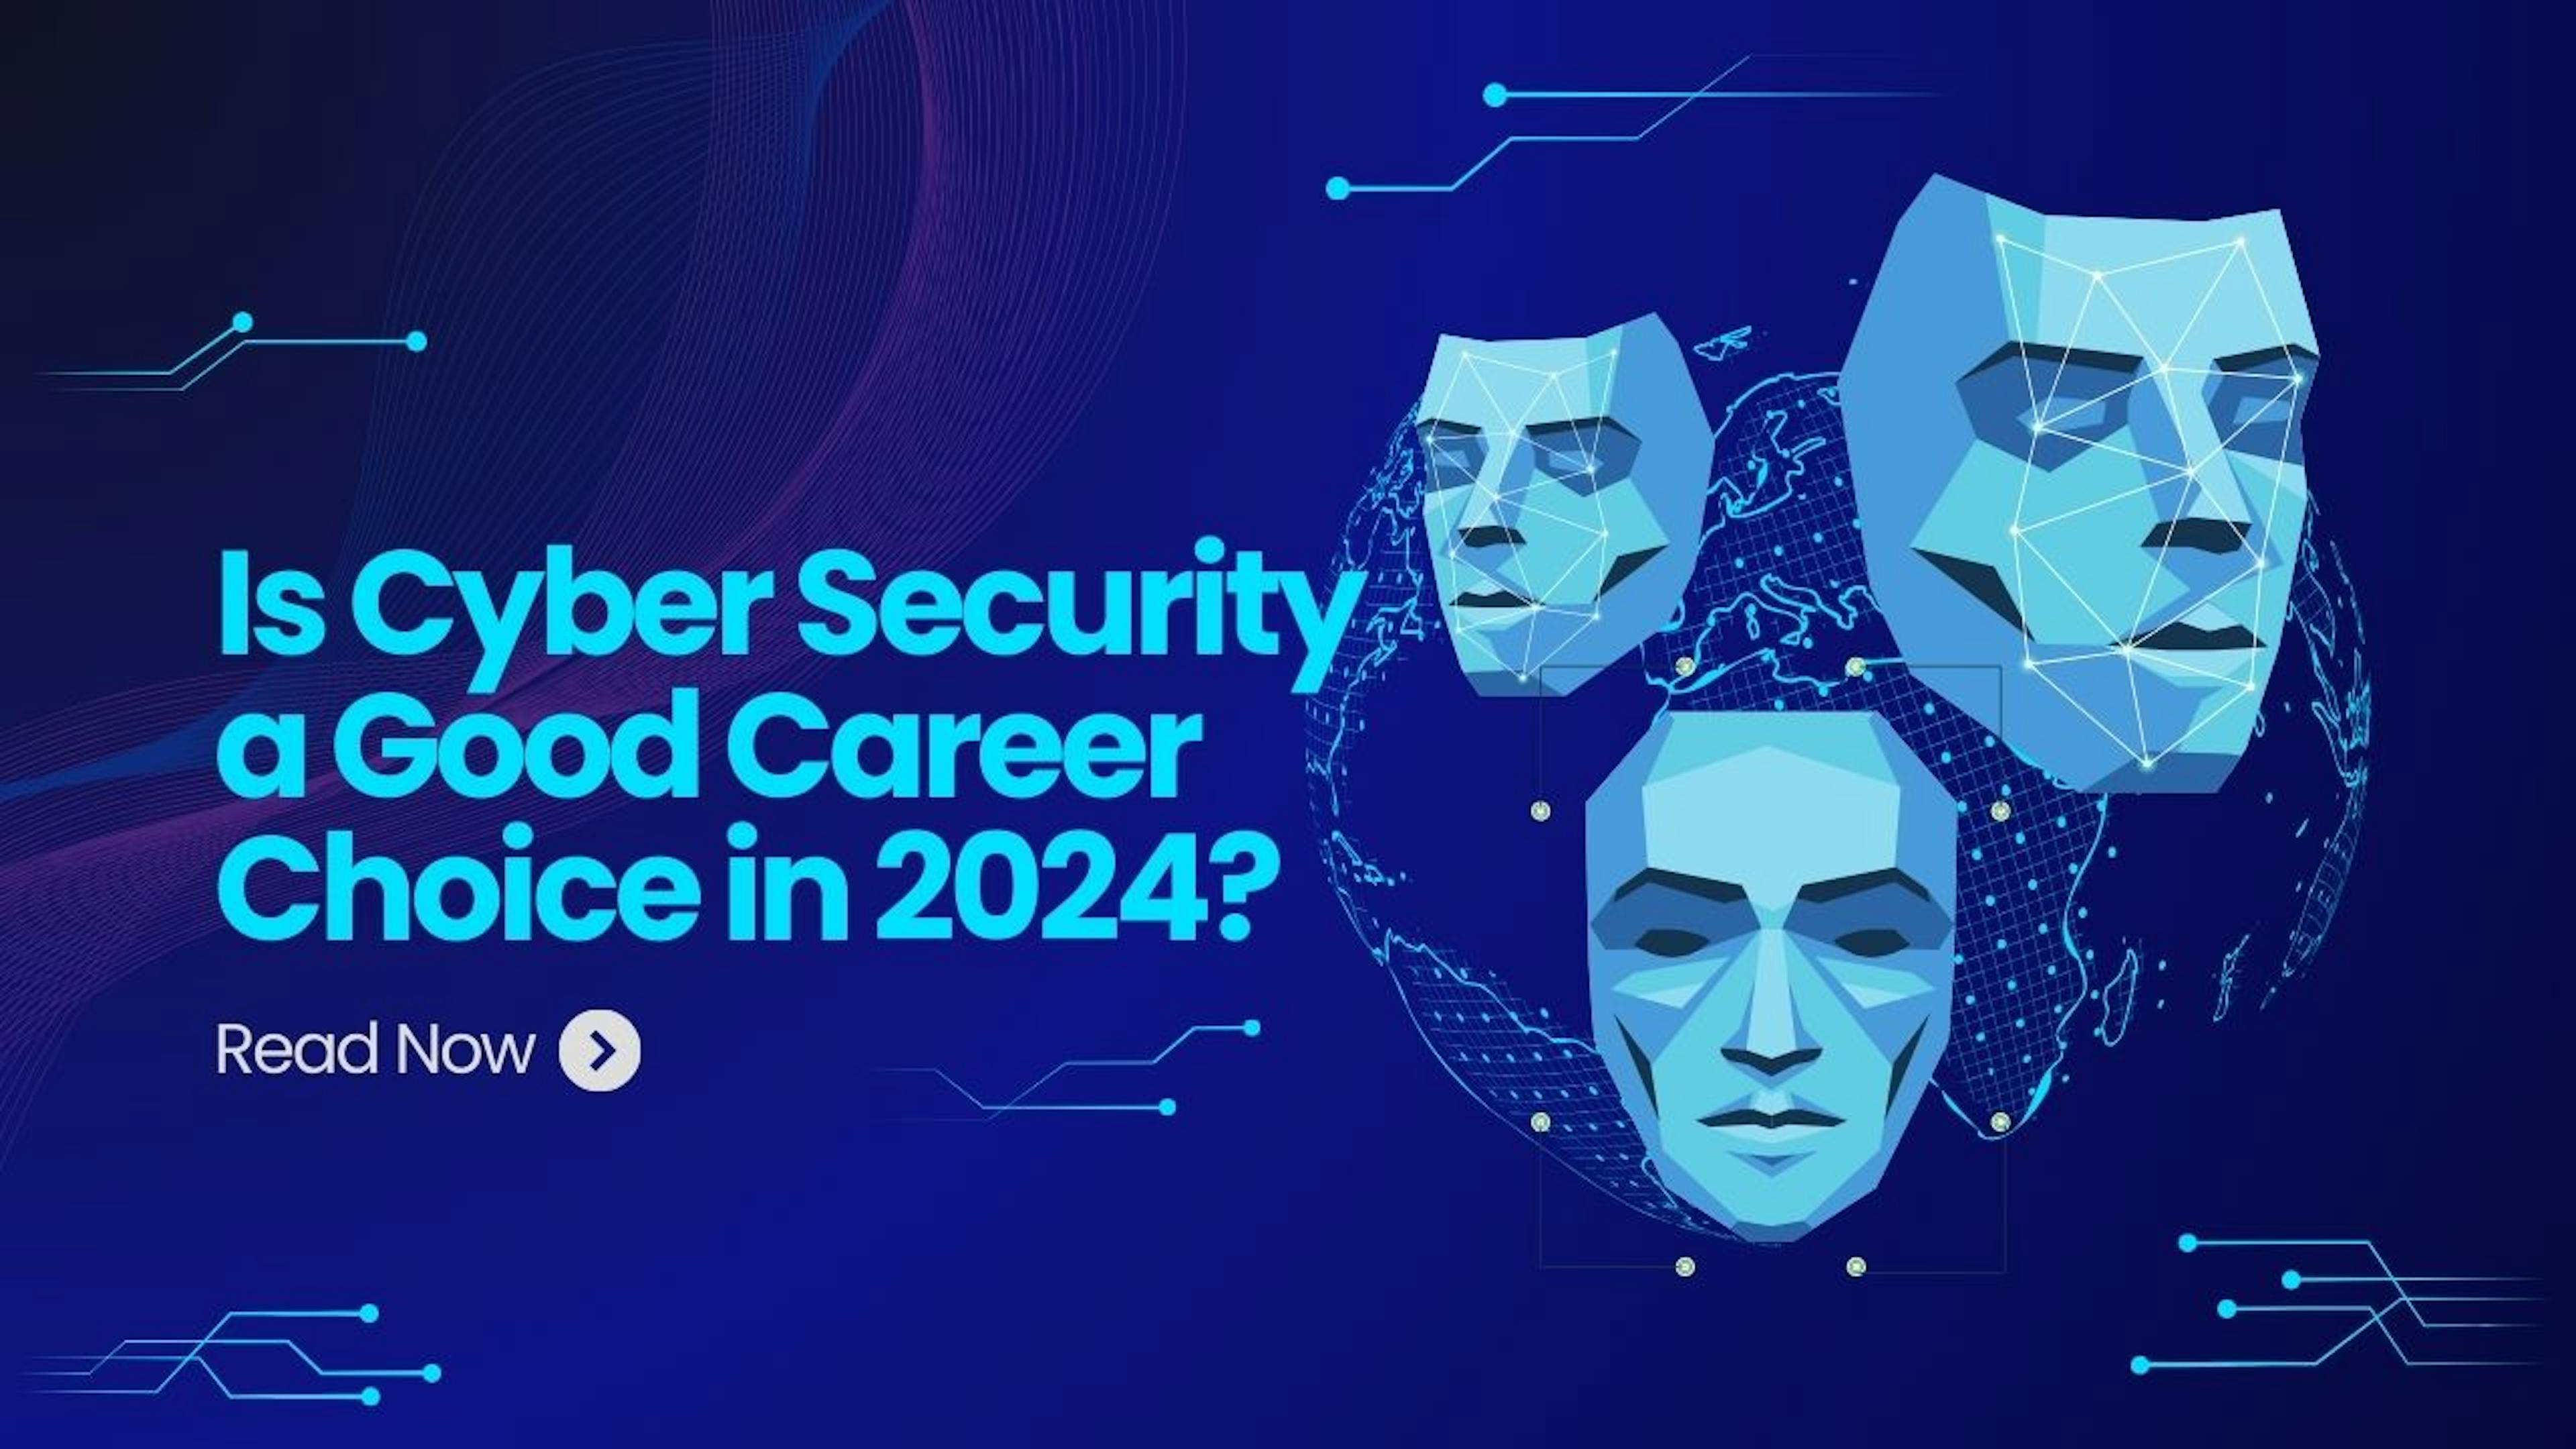 featured image - Is Cyber Security a Good Career Choice in 2024?